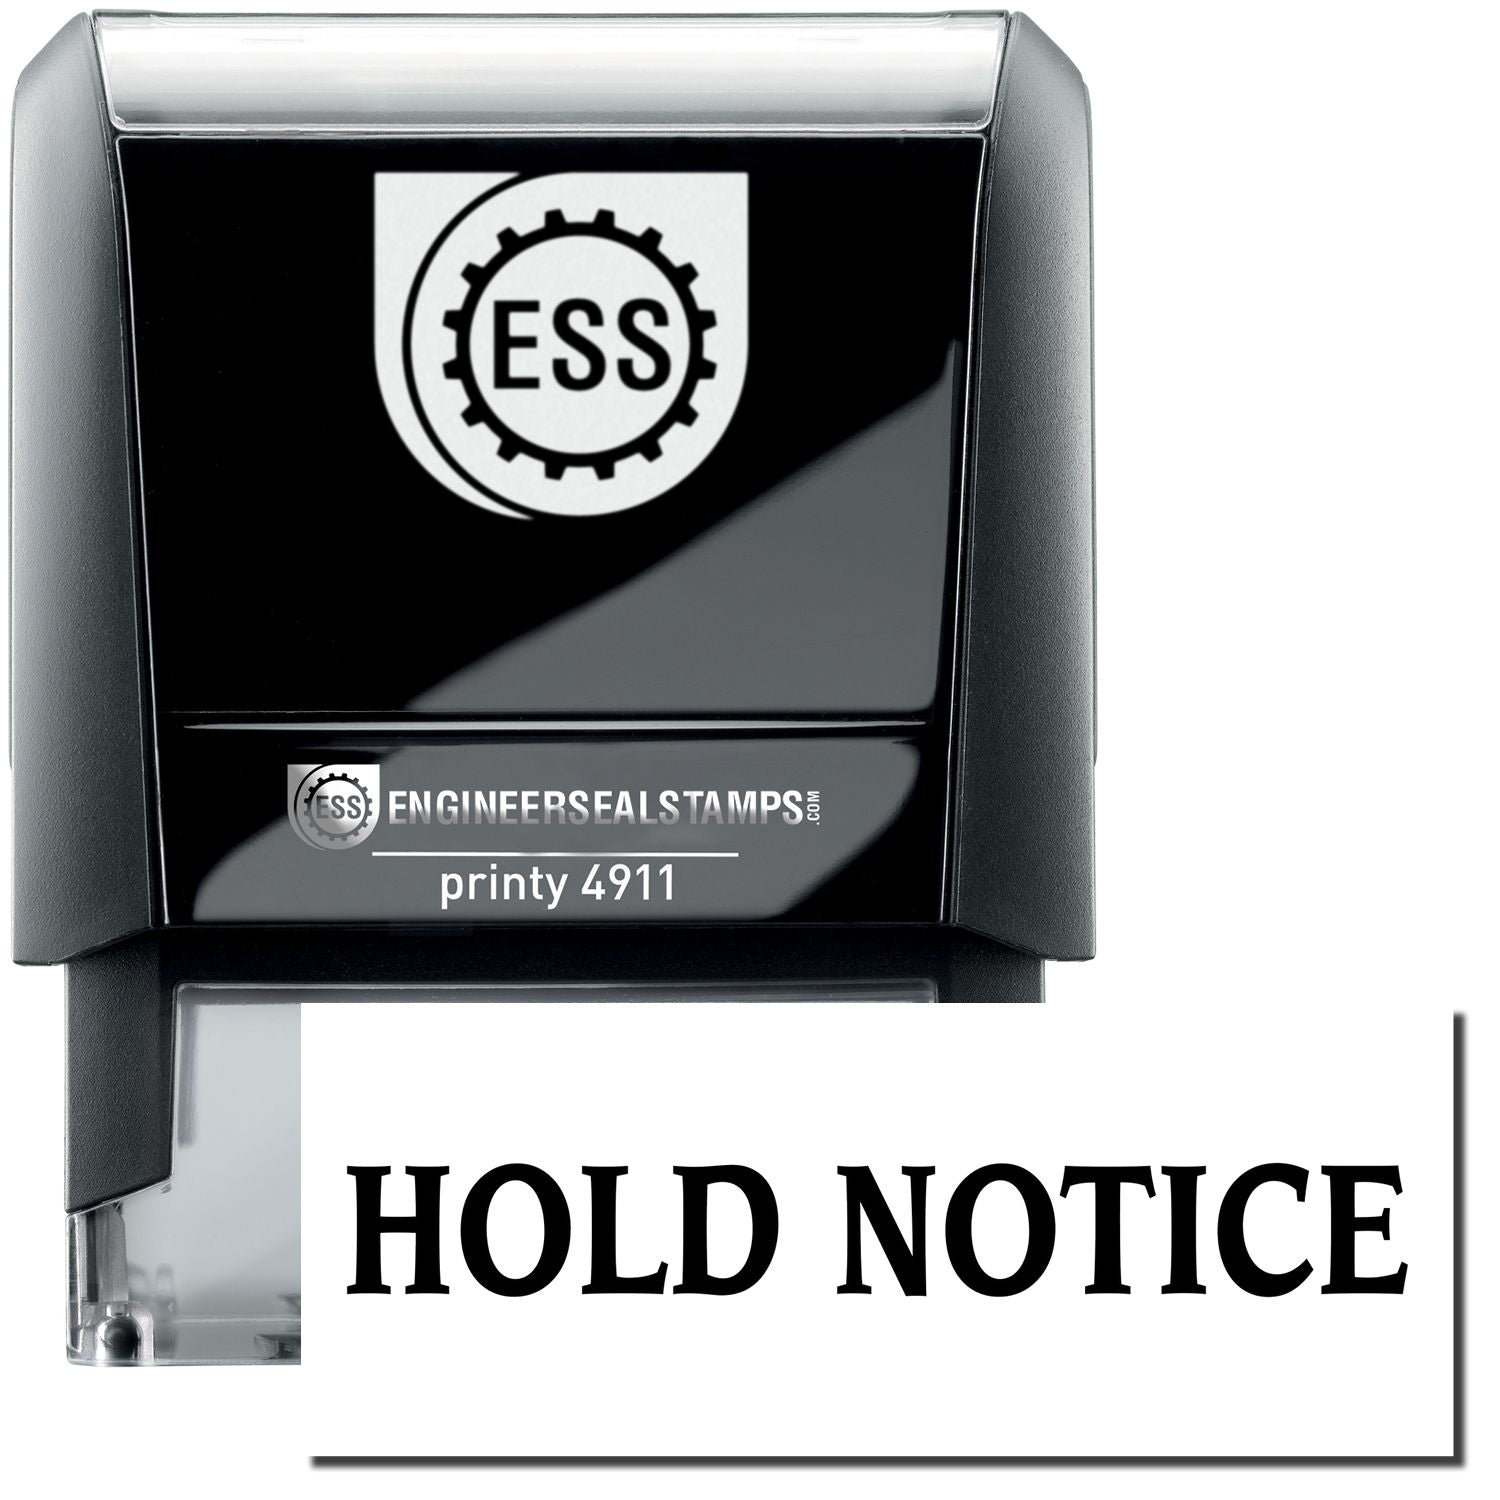 A self-inking stamp with a stamped image showing how the text "HOLD NOTICE" is displayed after stamping.